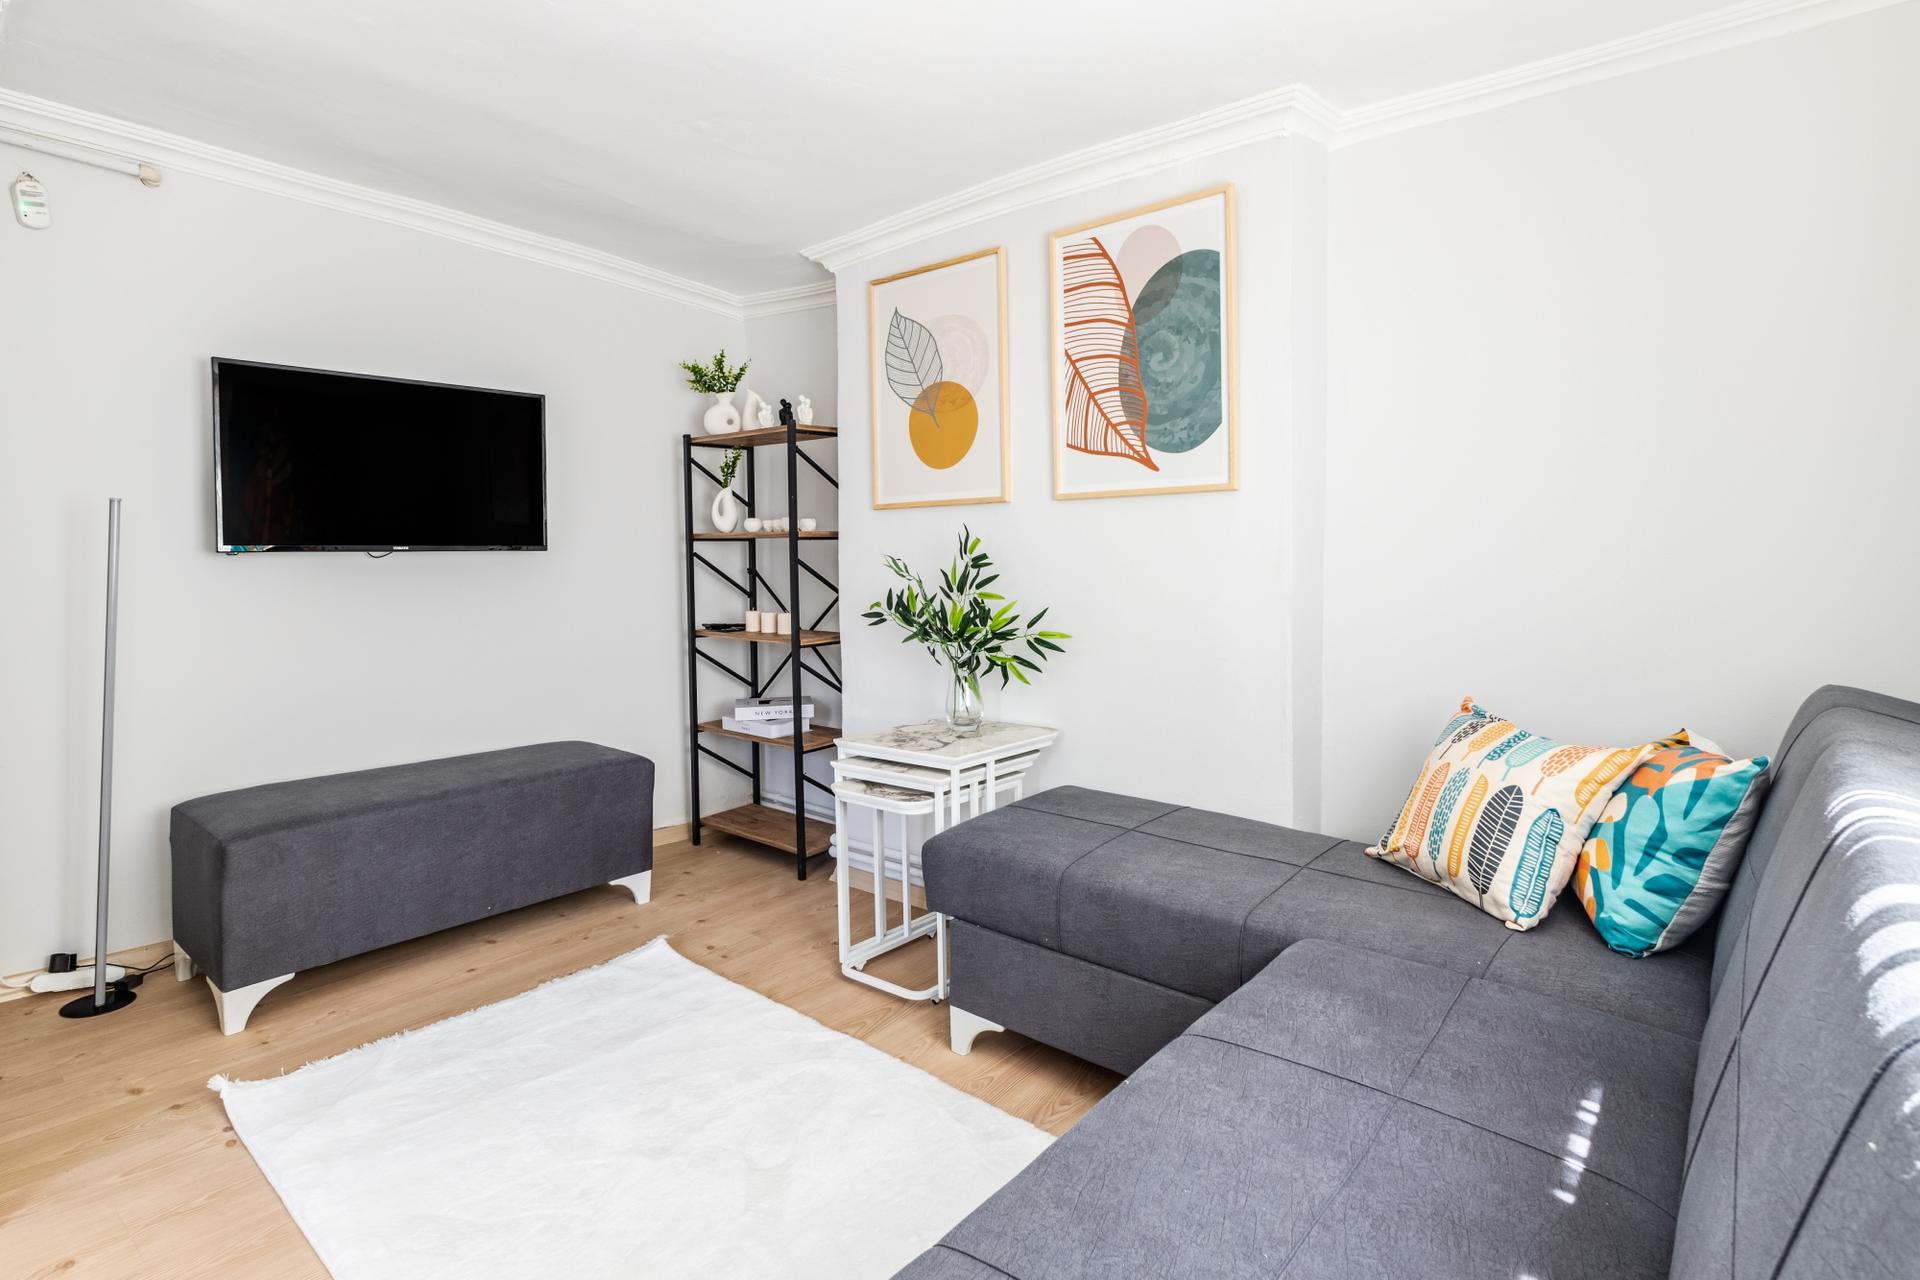 Enter a beautifully designed two-bedroom apartment featuring a modern aesthetic and every convenience you could desire.